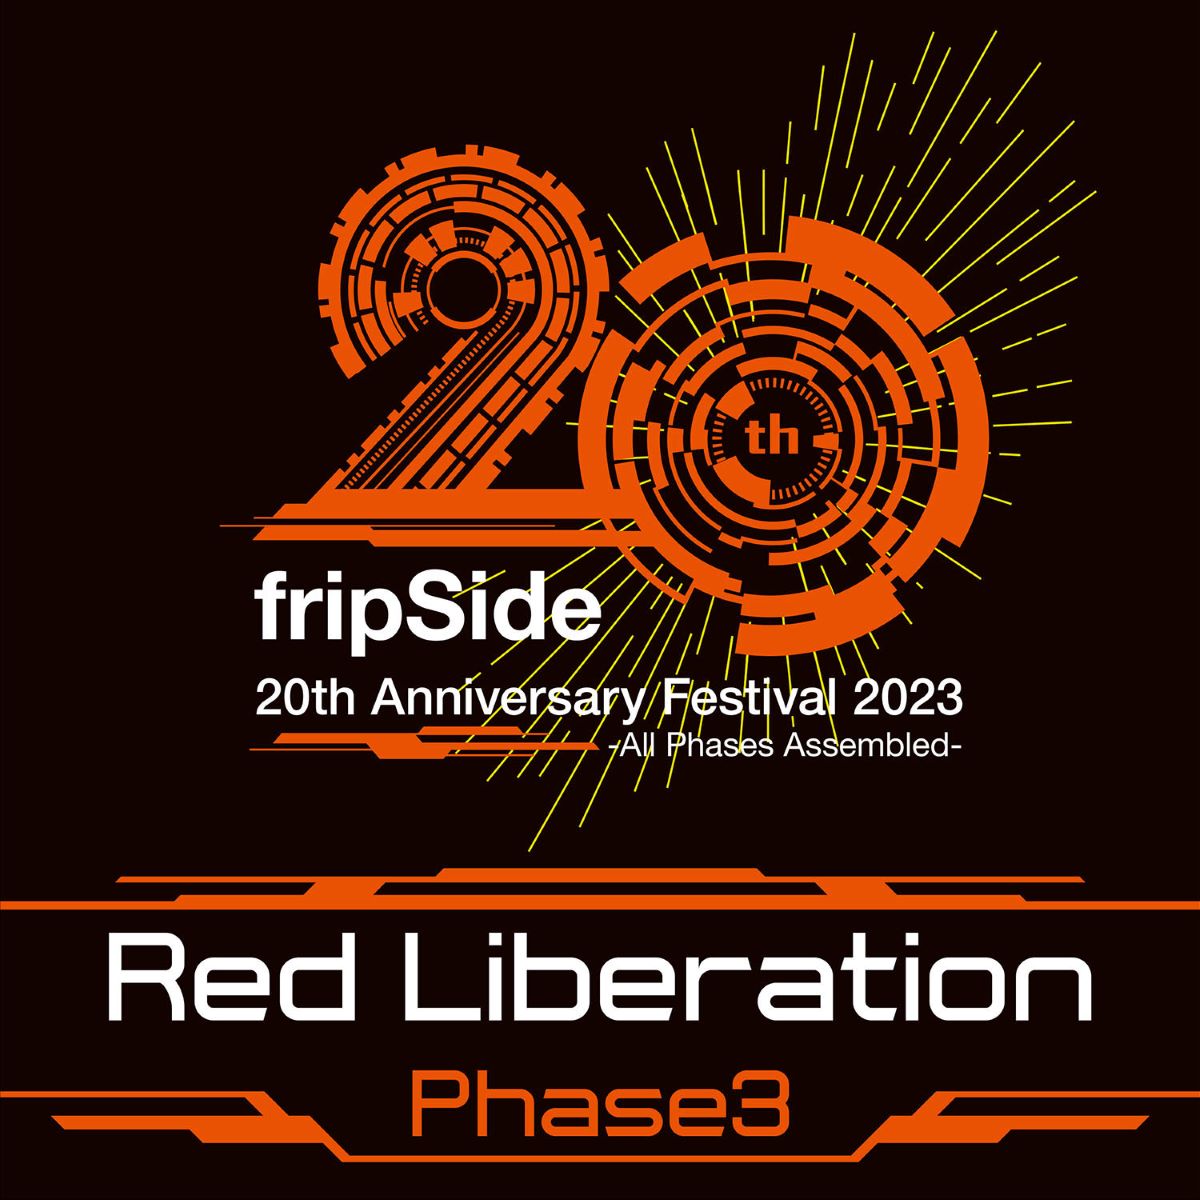 fripSide 20th Anniversary Festival 2023 -All Phases Assembled 